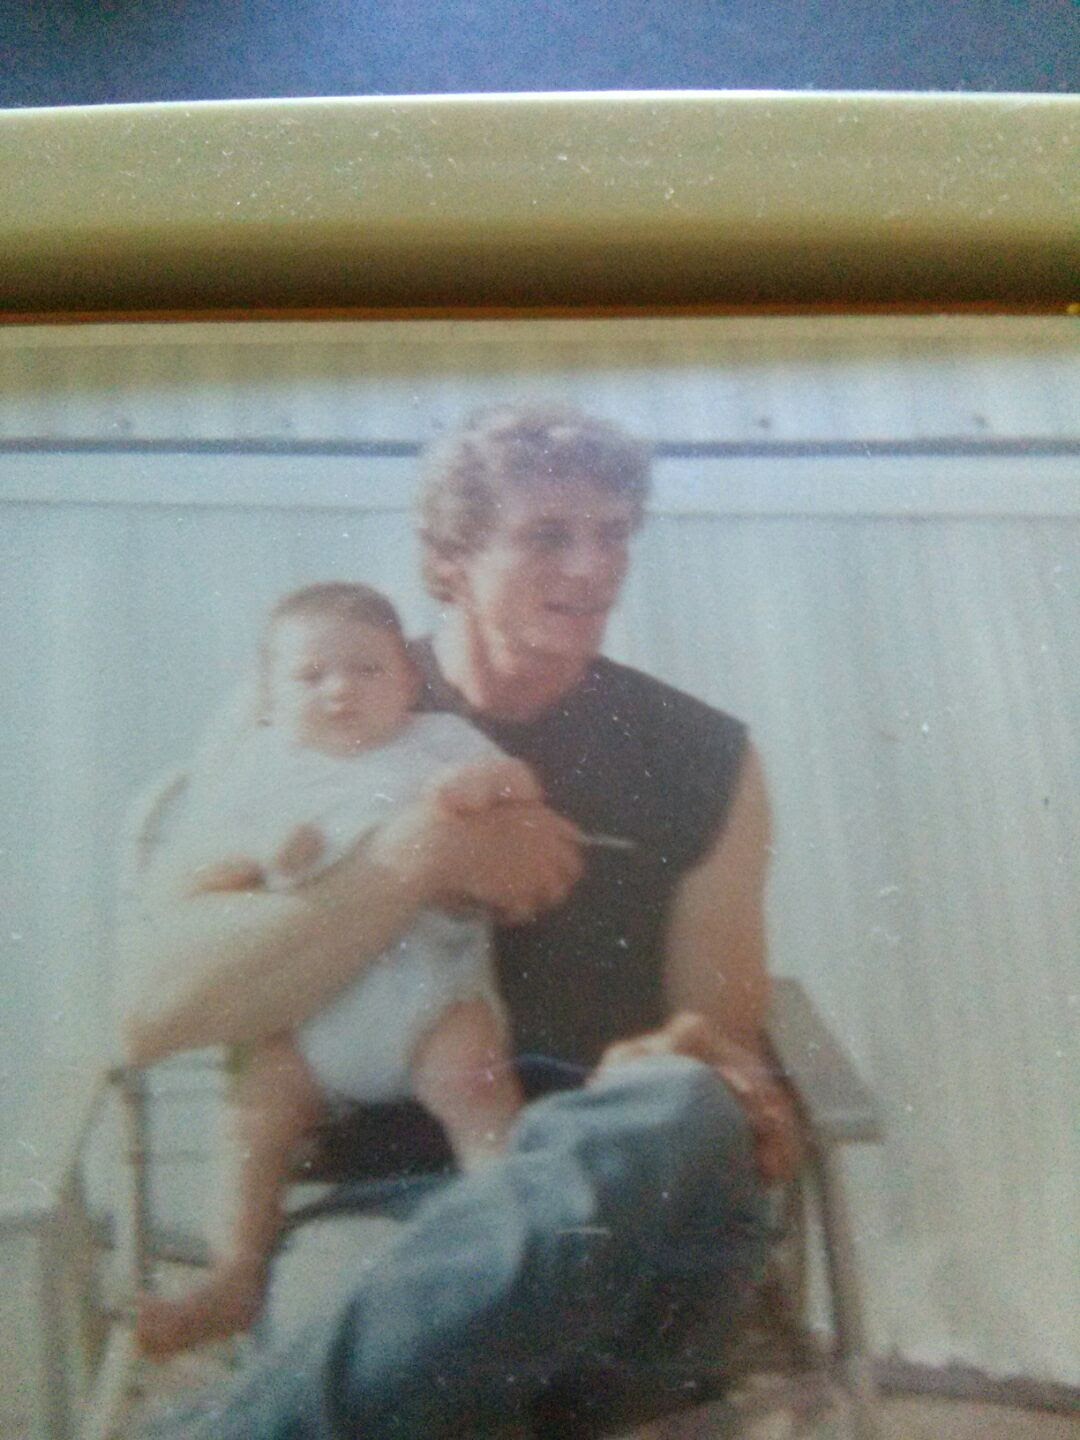 Dad and me